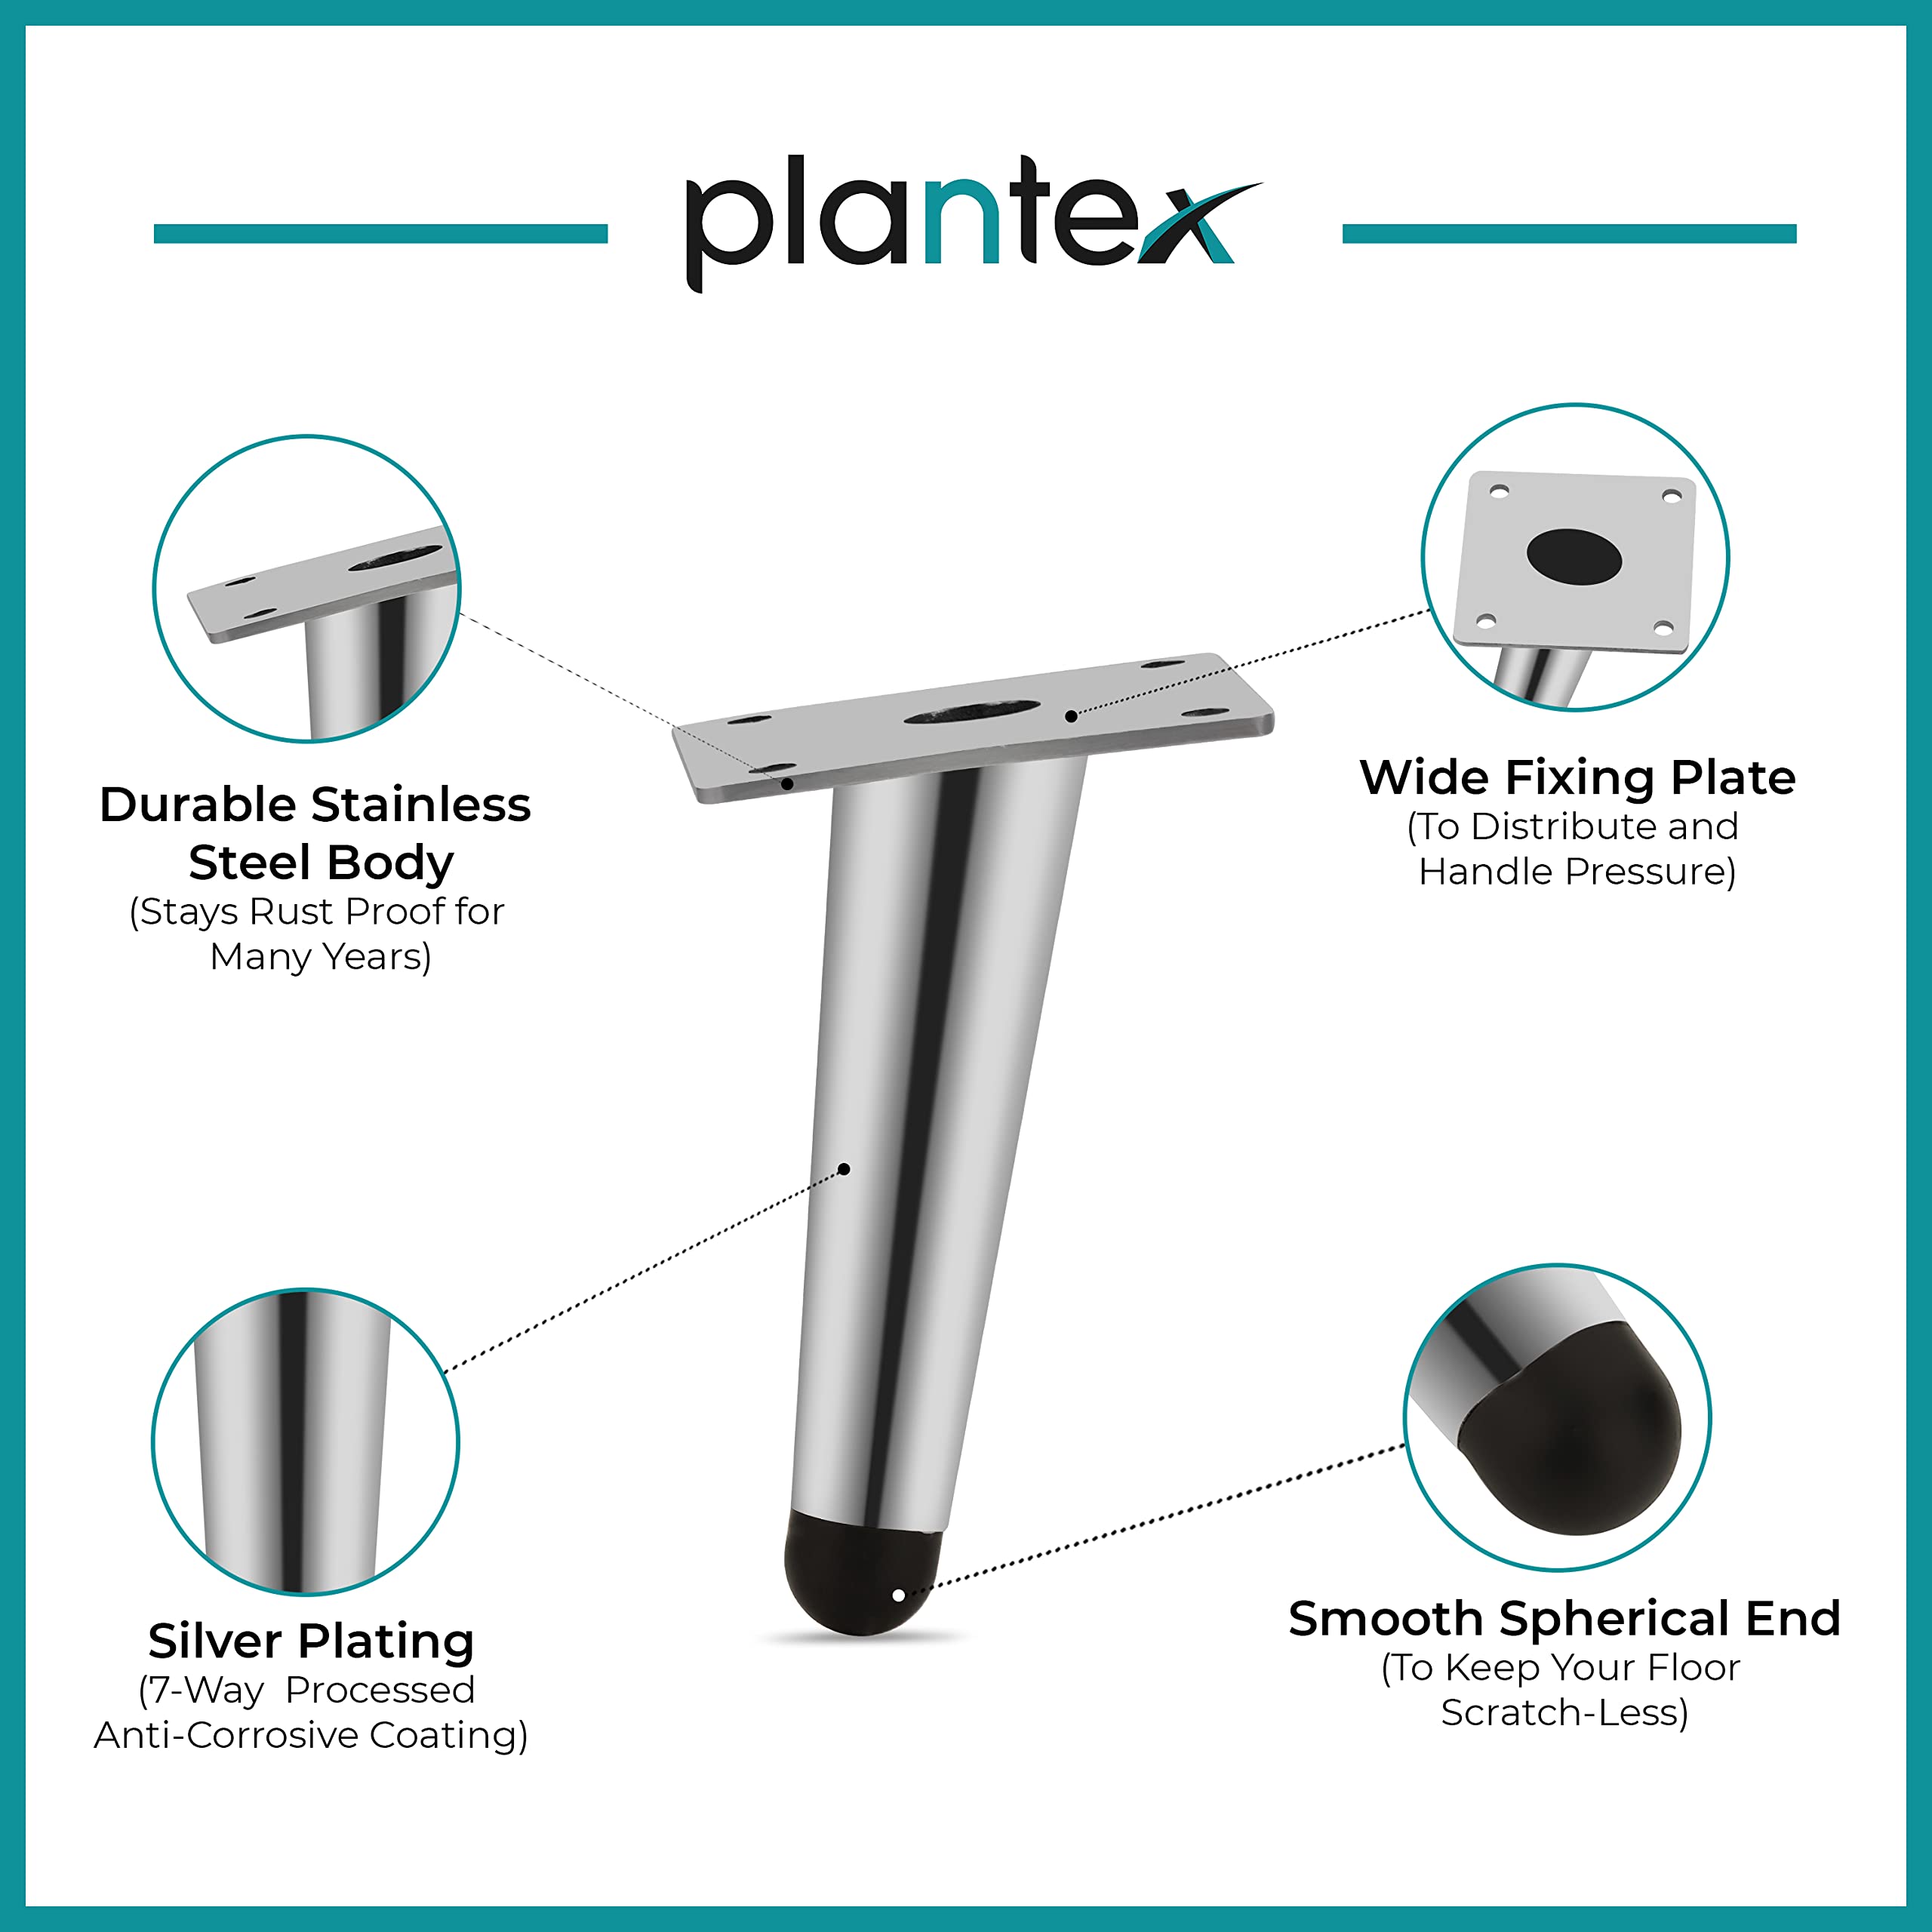 Plantex 304 Grade Stainless Steel 4 inch Sofa Leg/Bed Furniture Leg Pair for Home Furnitures (DTS-54-Chrome) – 8 Pcs